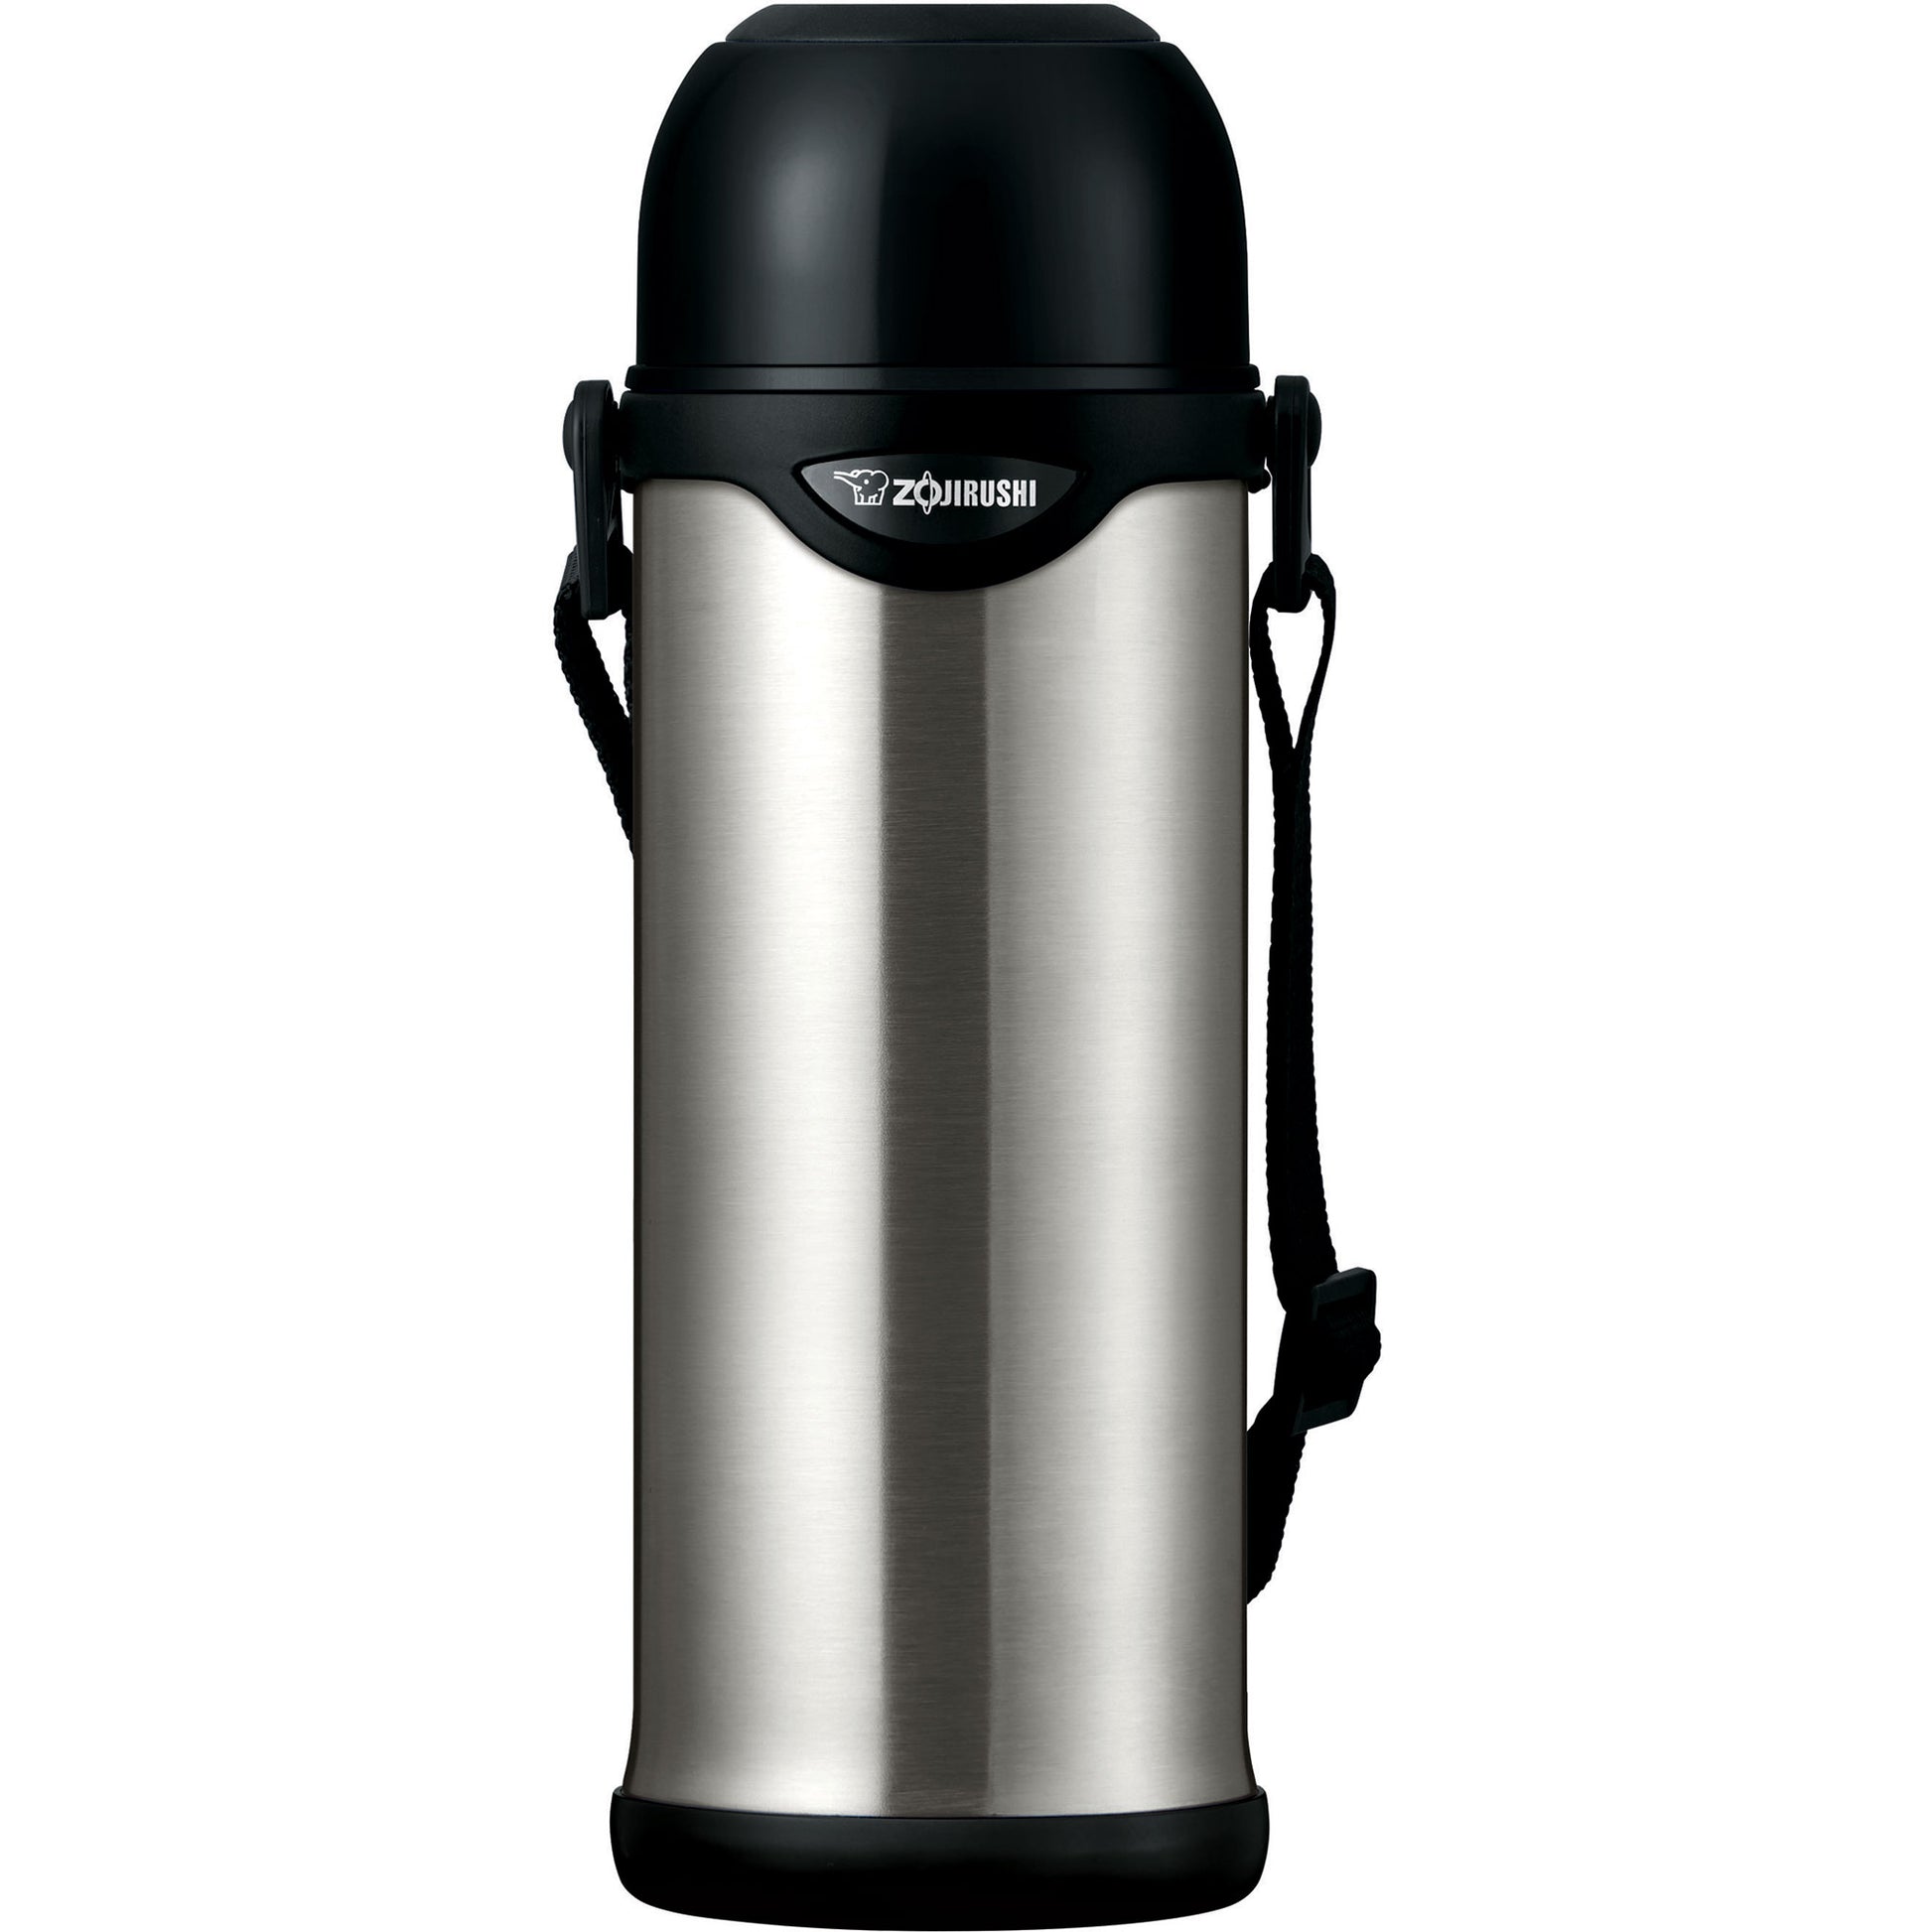 Tiger Stainless Steel Bottle With Screw Lid MMP-J – Sampoyoshi